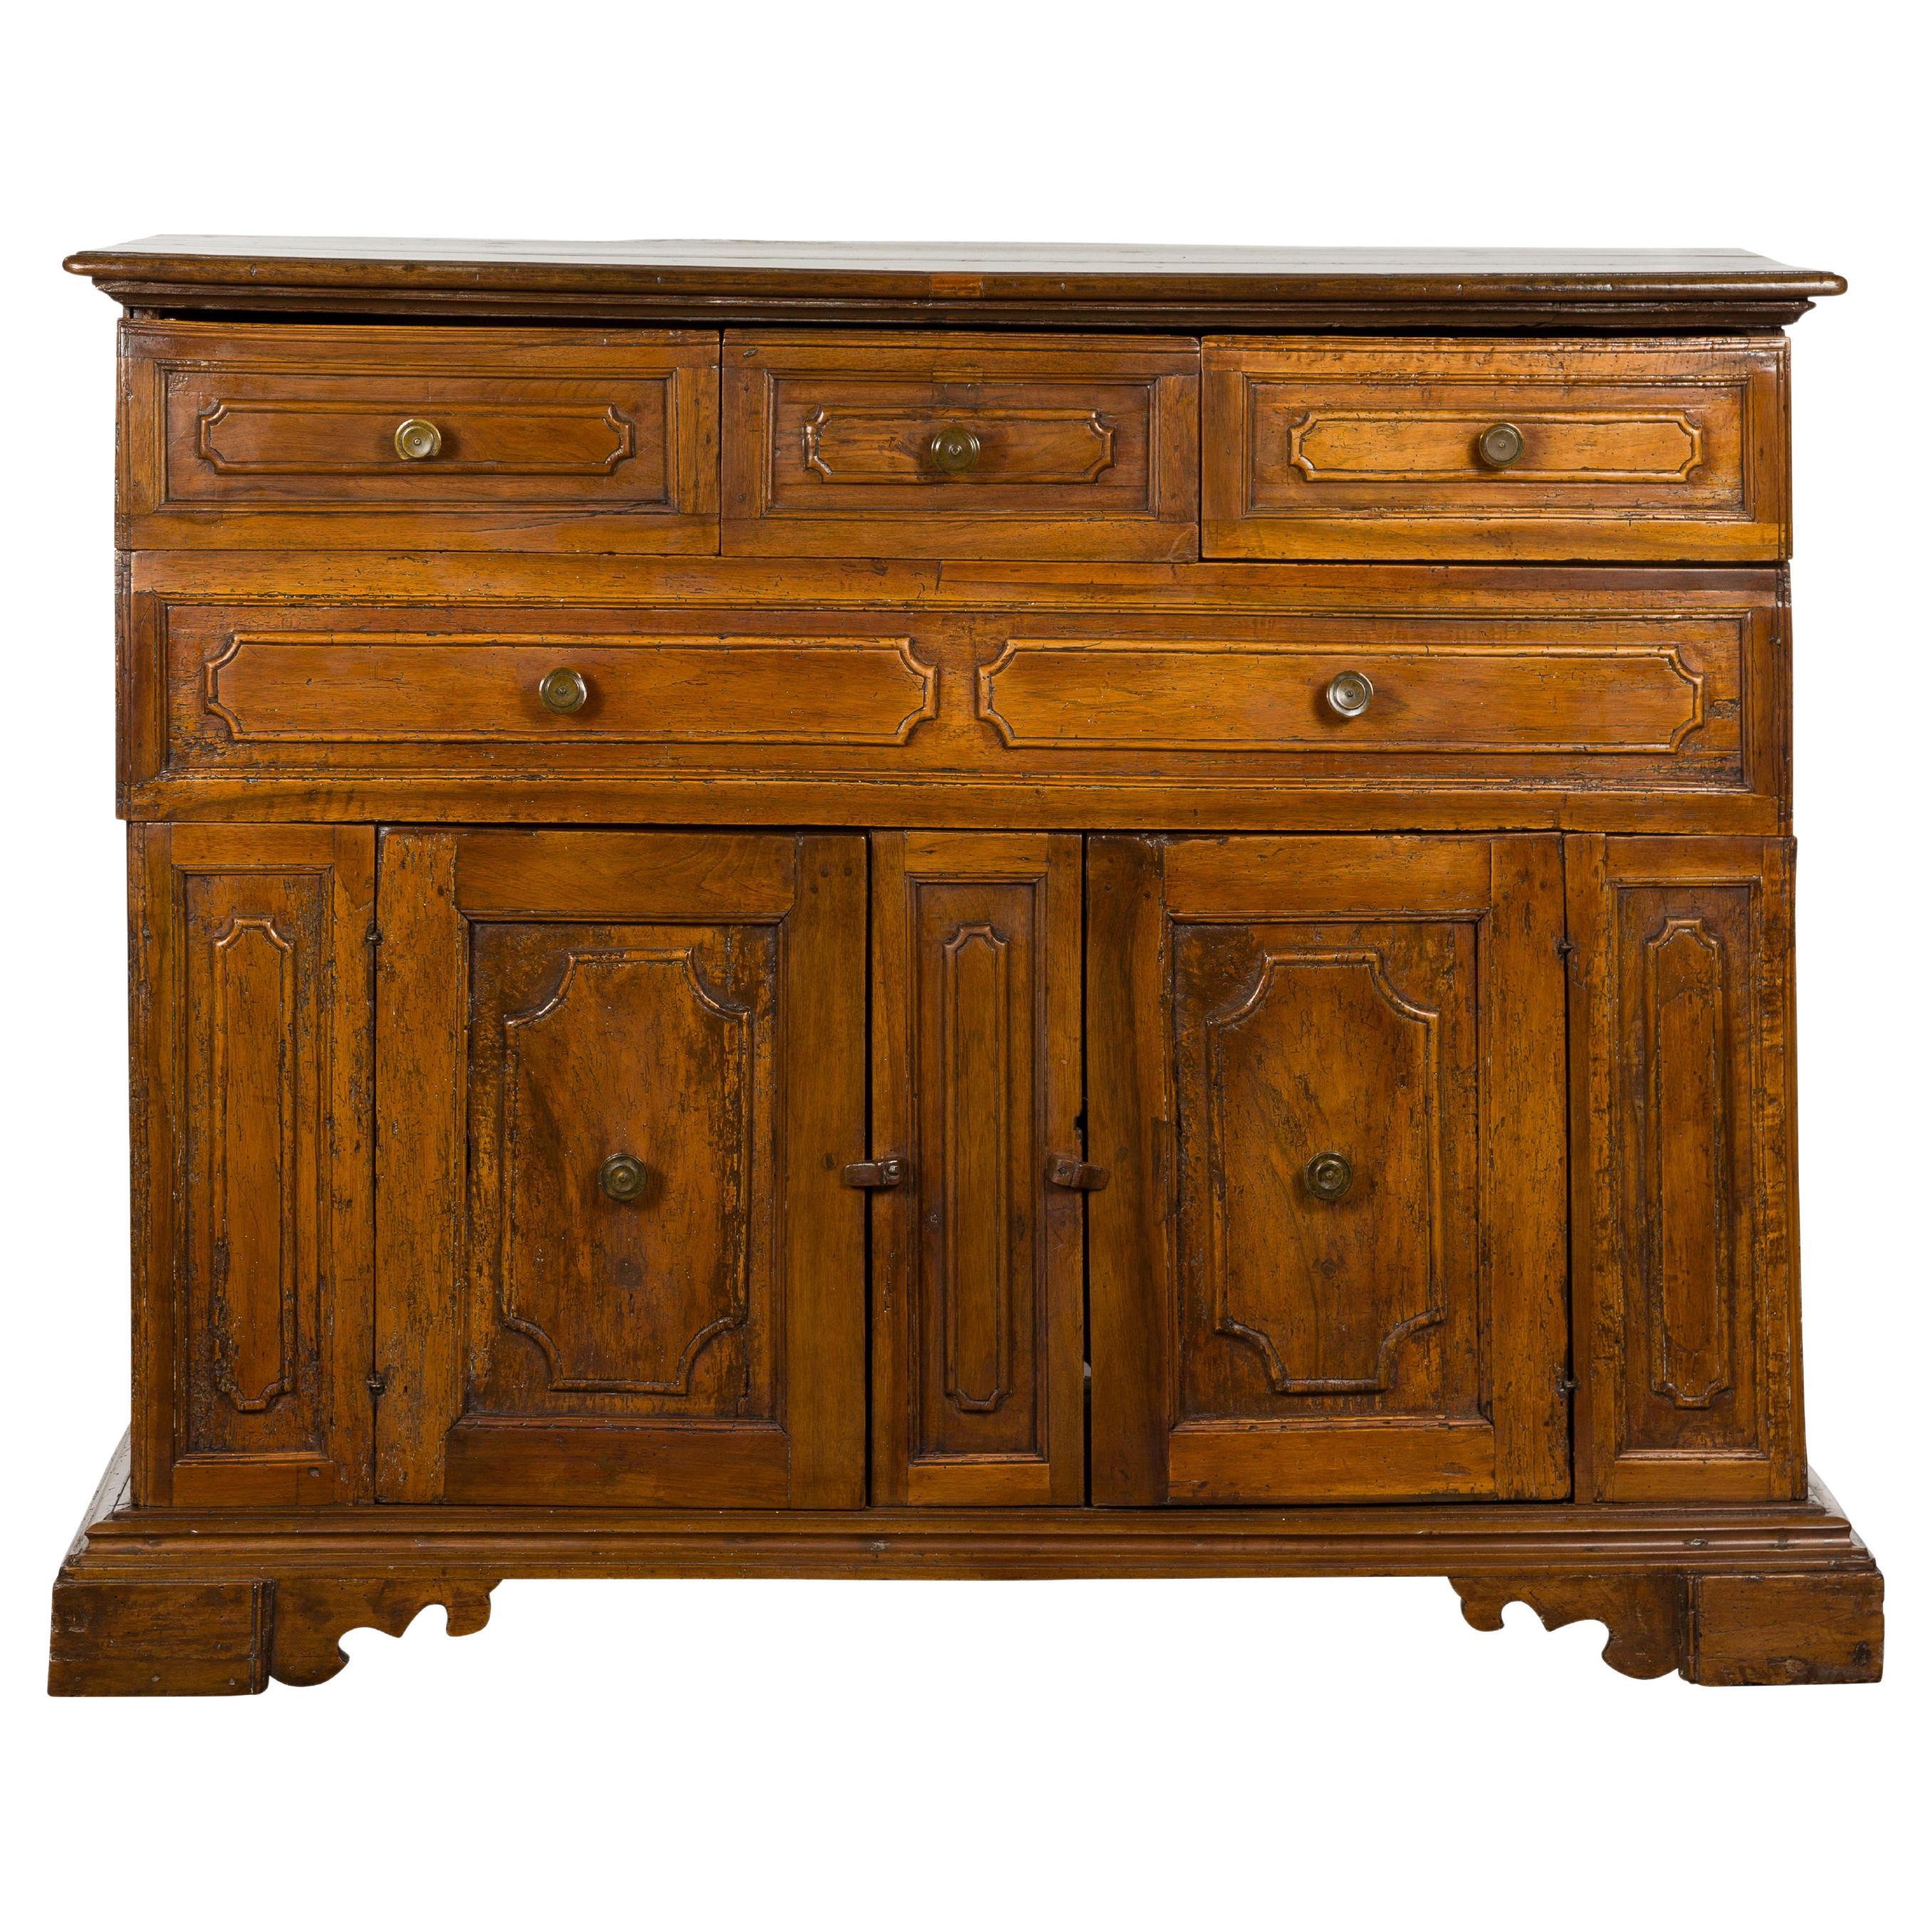 Italian 18th Century Walnut Credenza with Four Drawers, Two Doors, Bracket Feet For Sale